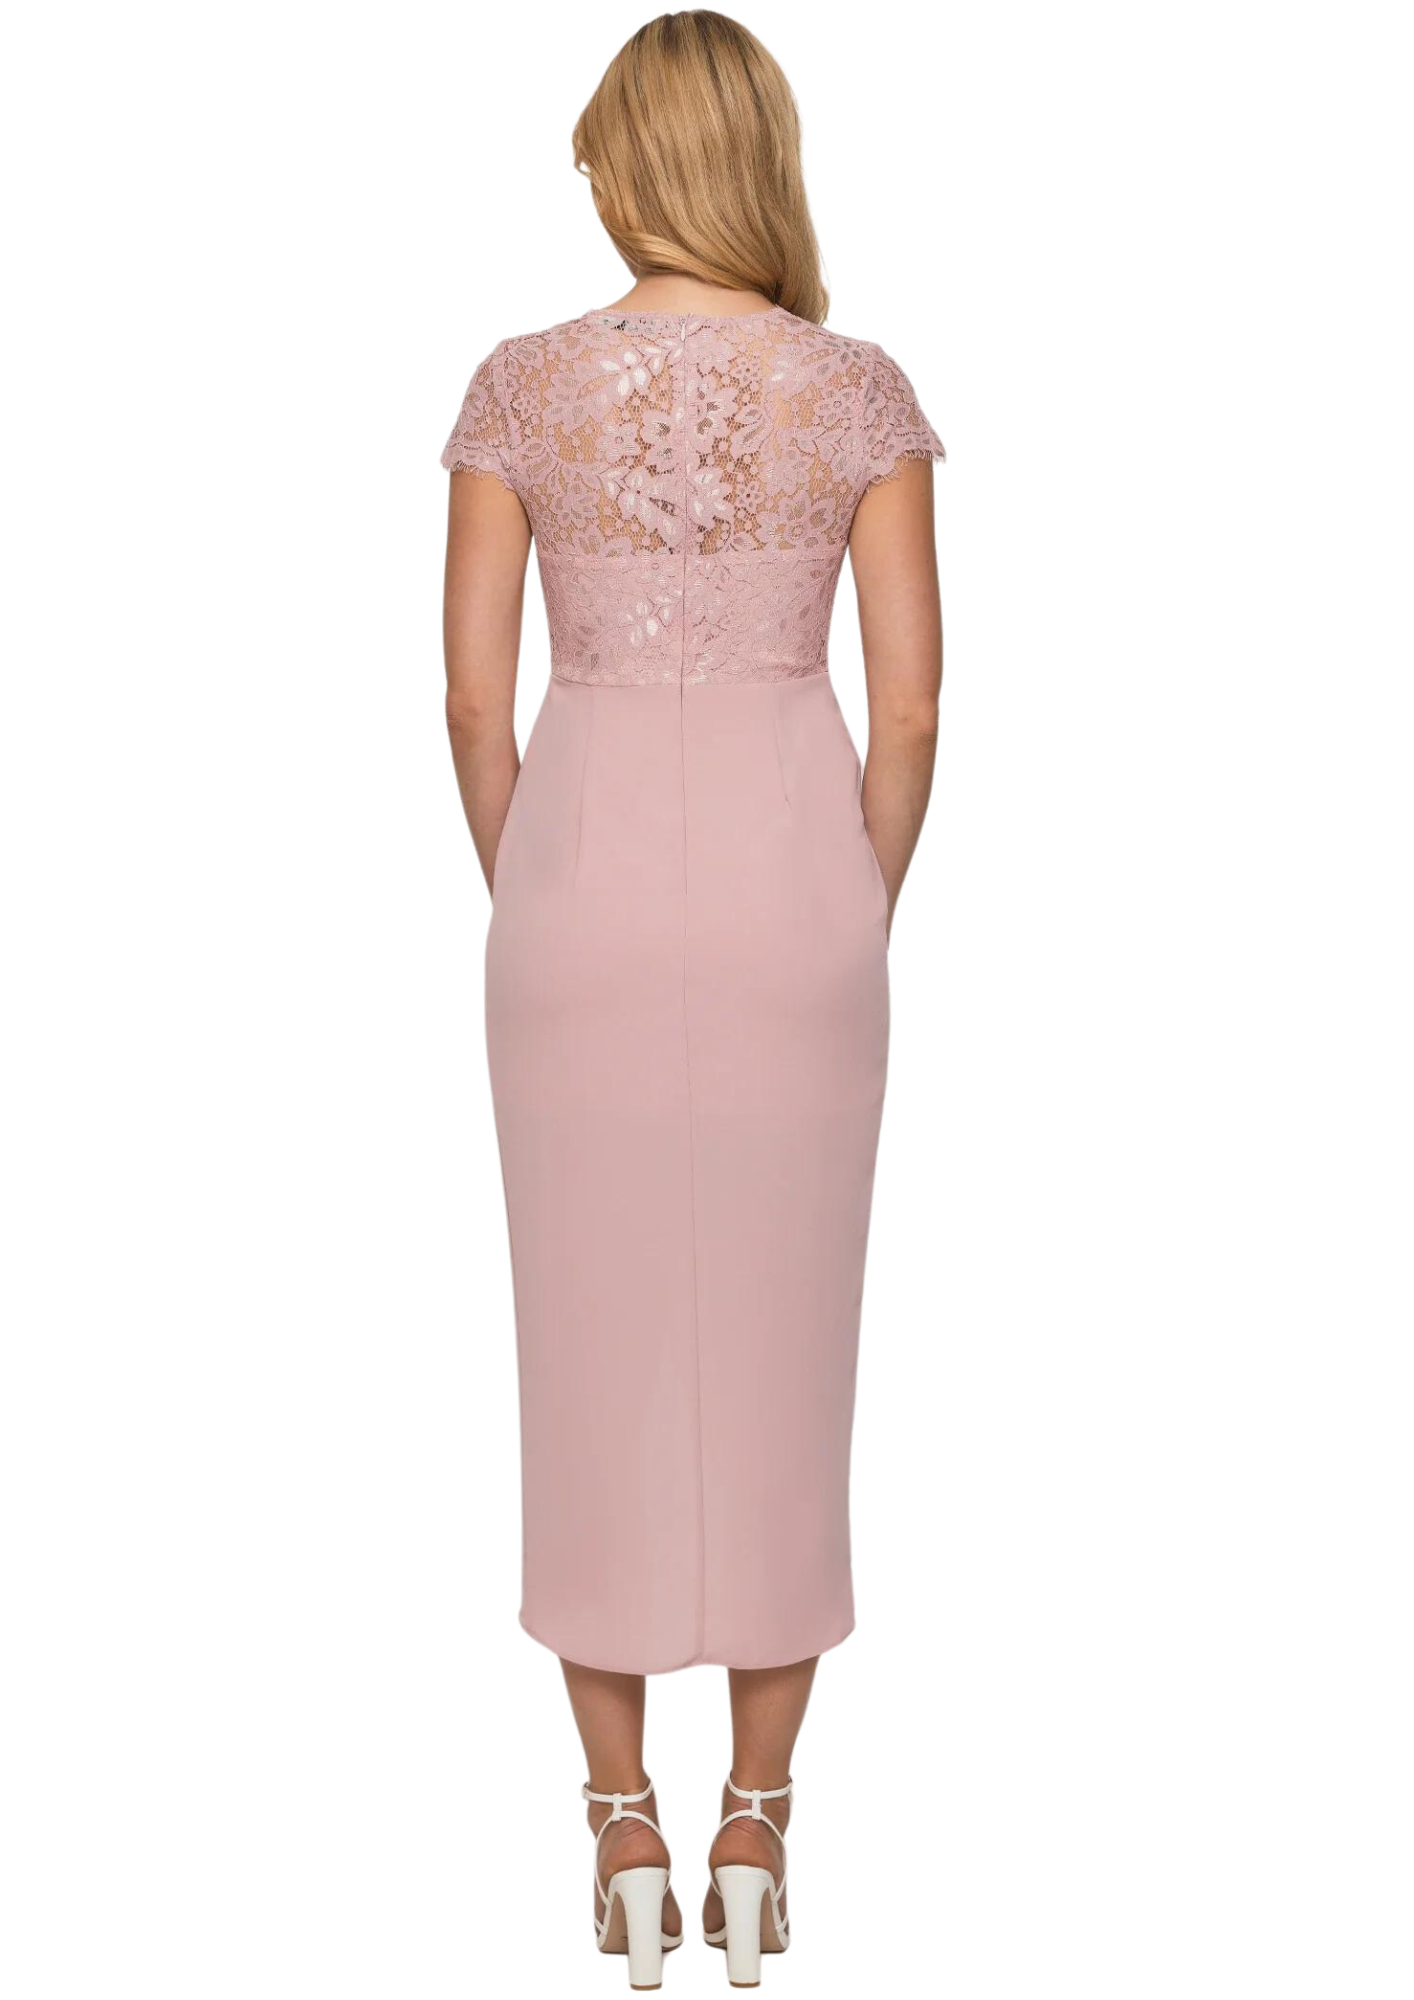 Asymmetric Hemline with Embroidery Lace Top - Blush